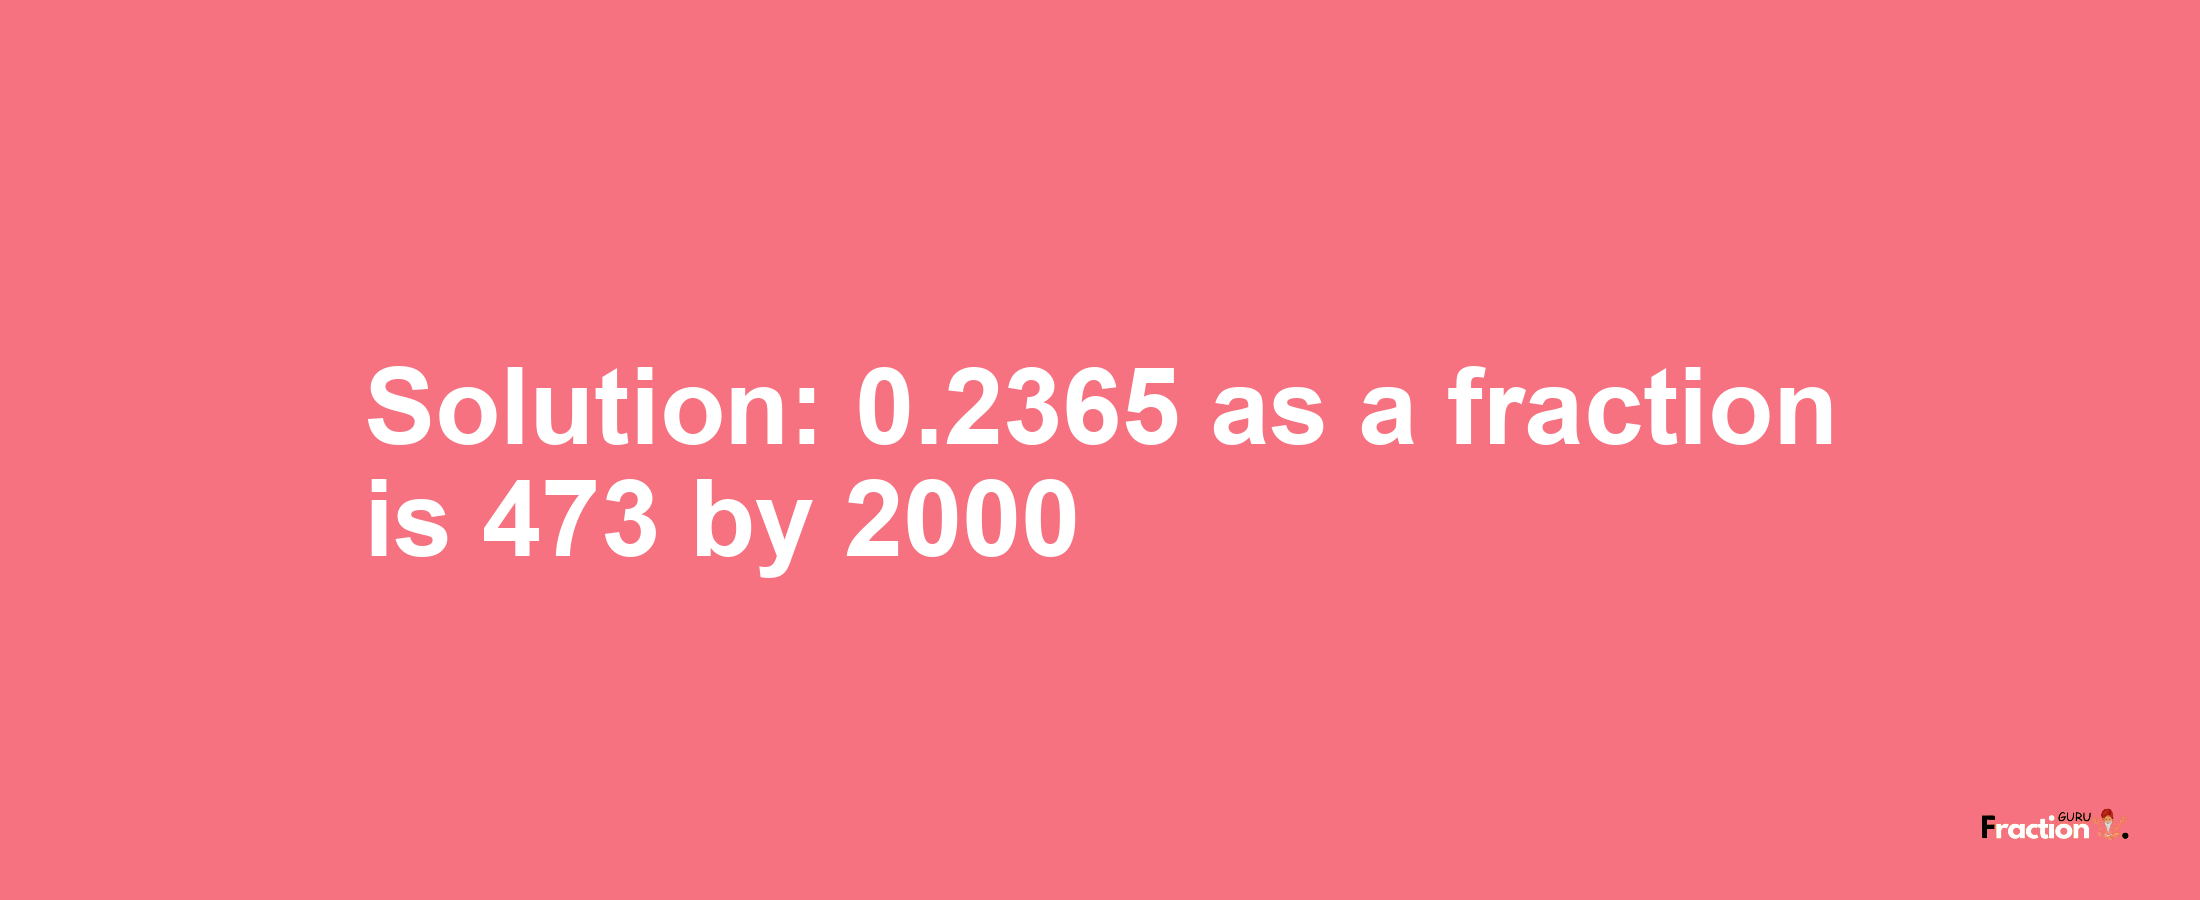 Solution:0.2365 as a fraction is 473/2000